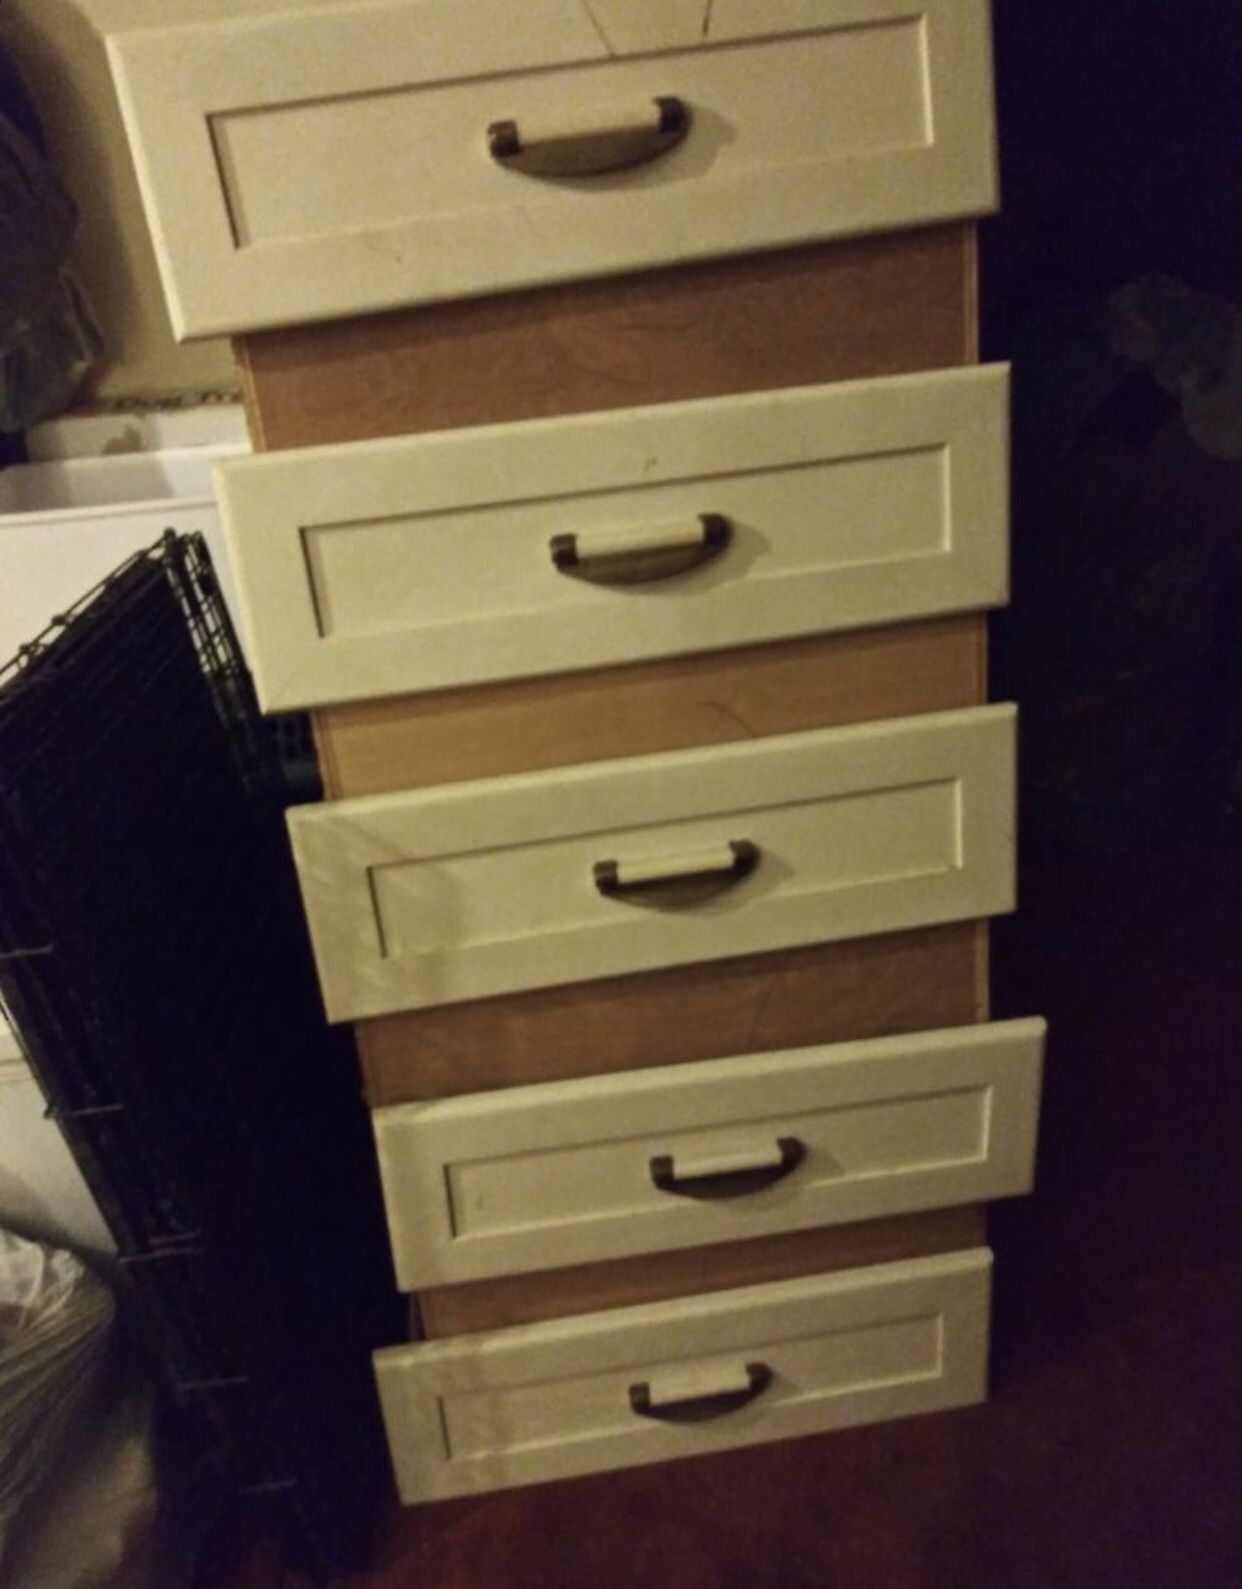 FREE DRESSER 9 drawers (nothing wrong - ask for address if you’re really coming)